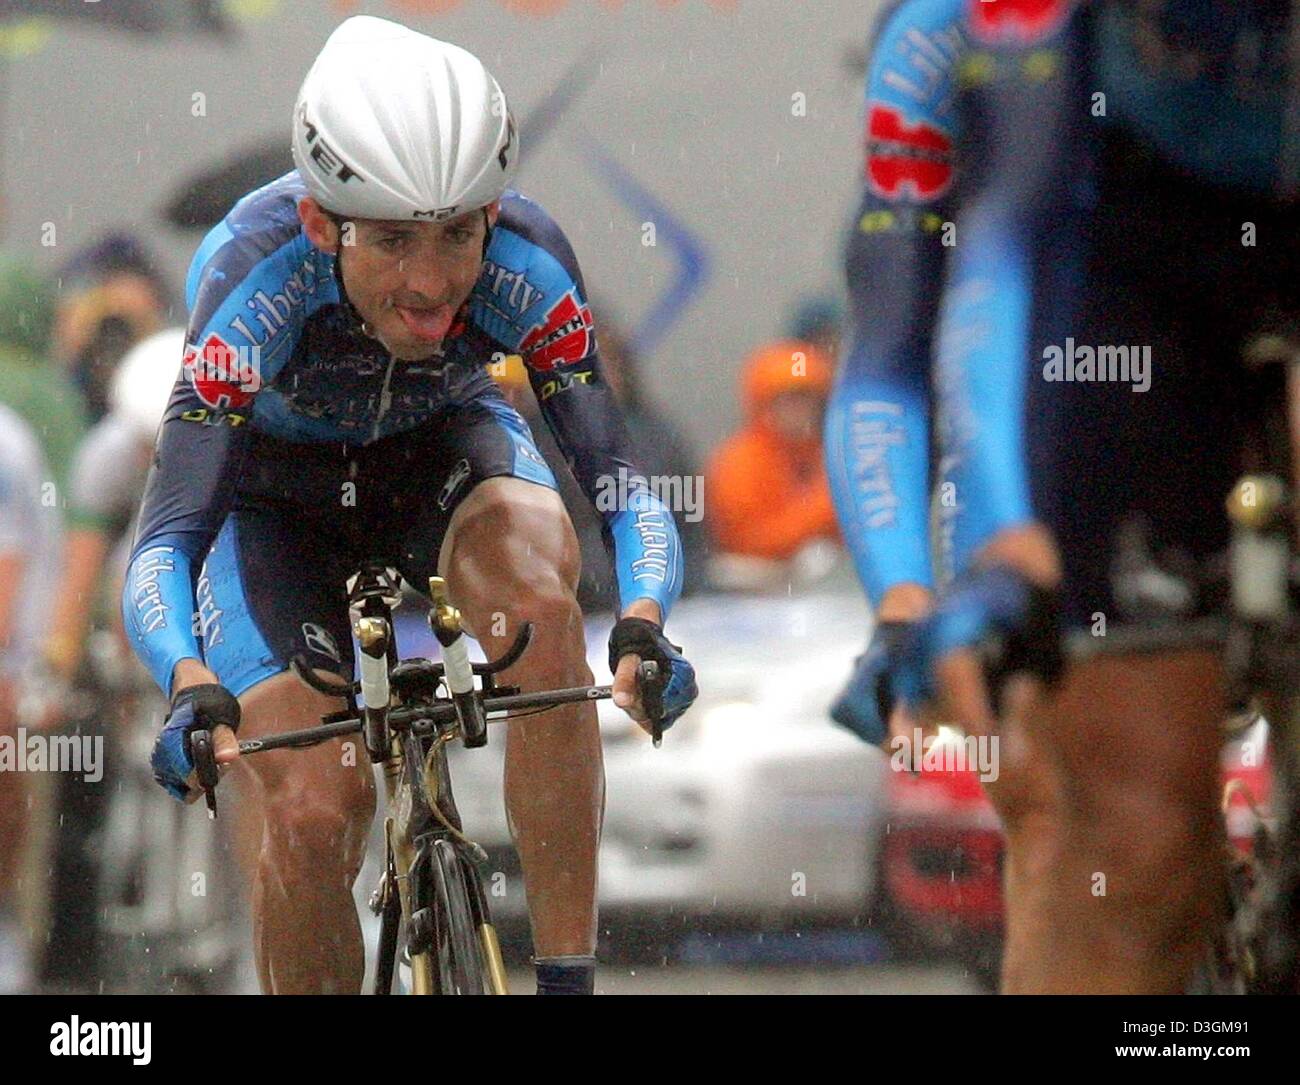 (dpa) - Team Liberty Seguros, led by Spanish cyclist Roberto Heras, rides during the 64.5 km long fourth stage of the Tour de France from Cambrai to Arras, France, 7 July 2004. Heavy rains throughout the stage caused many crashes and defects. The team finished in 7th place. Stock Photo